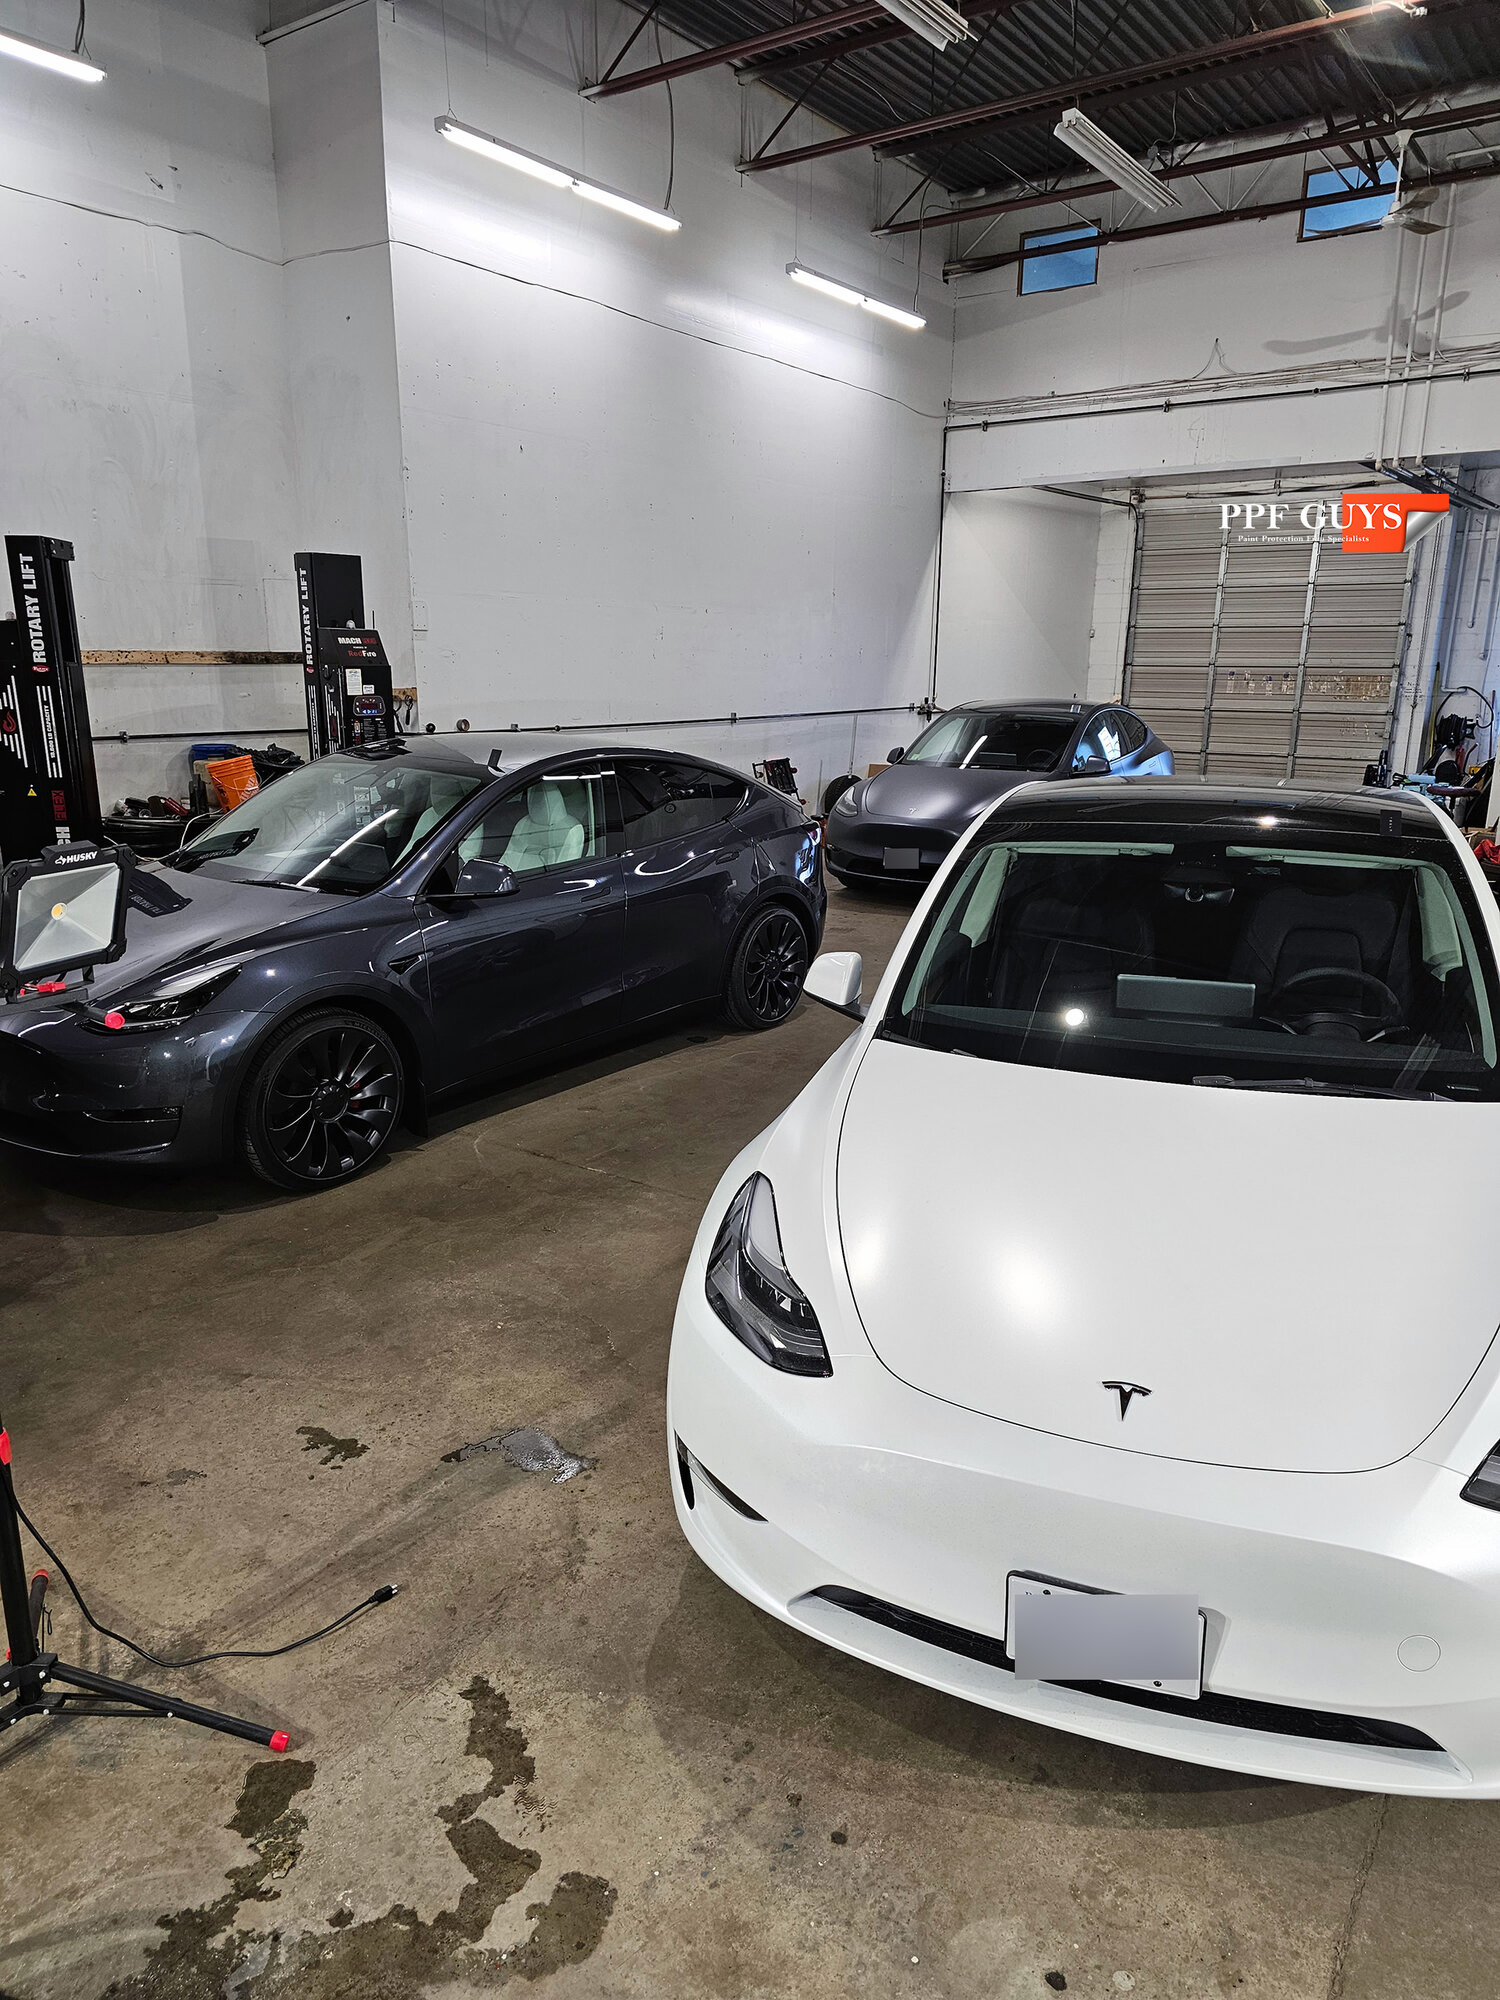 PPF Guys Model Y Silver Full Body Ultimate Fusion, blacked out emblems (21).jpg